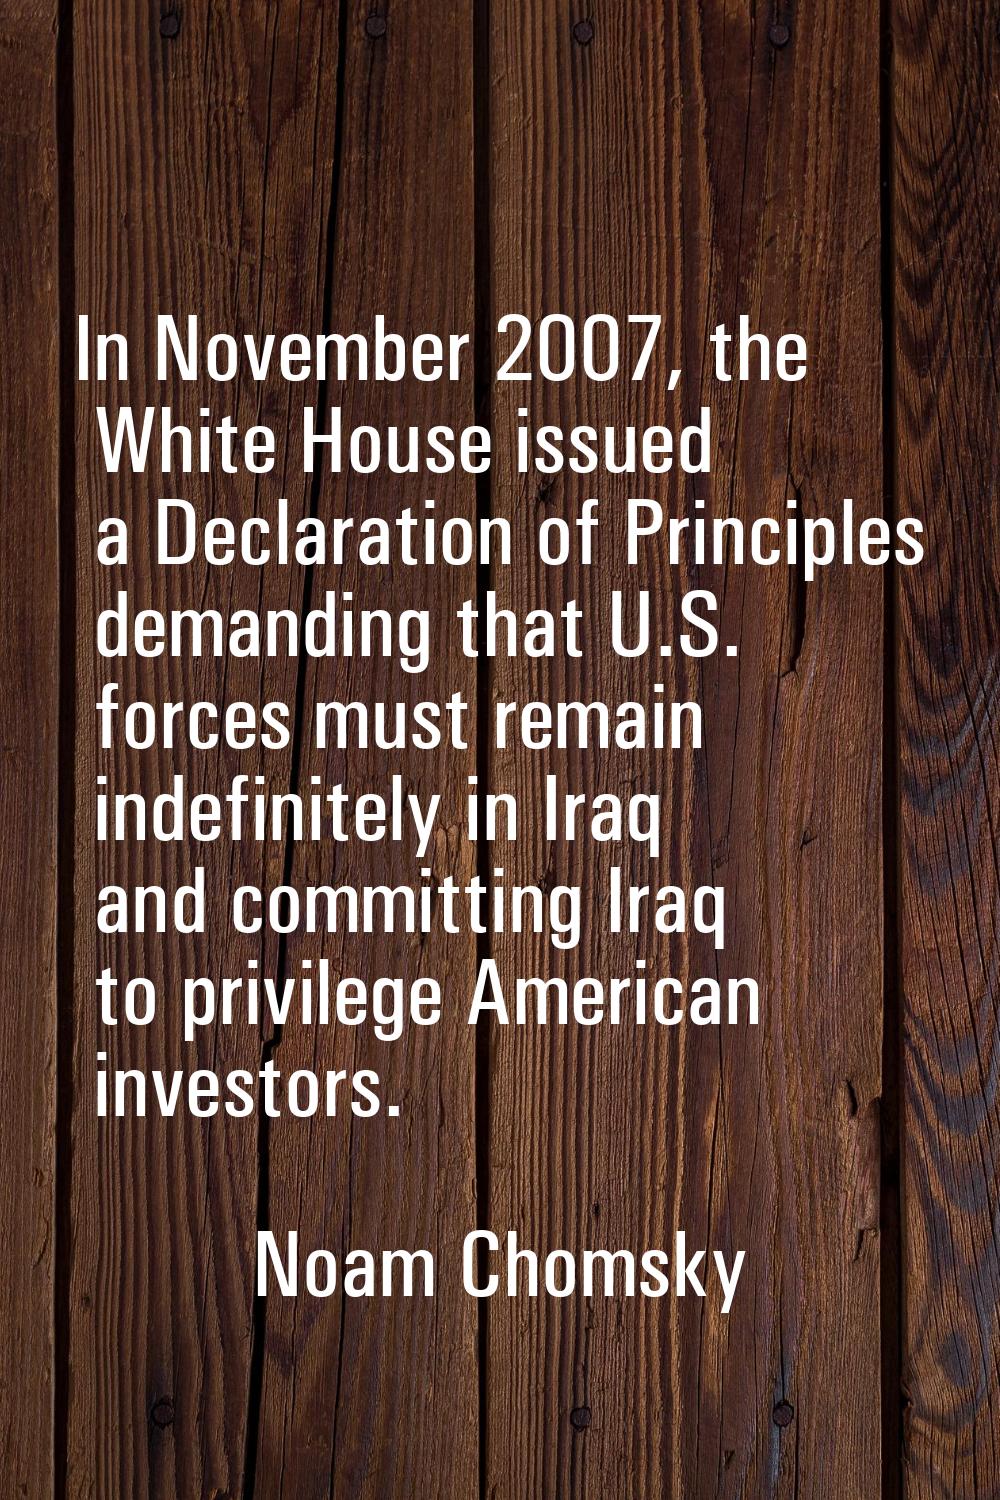 In November 2007, the White House issued a Declaration of Principles demanding that U.S. forces mus